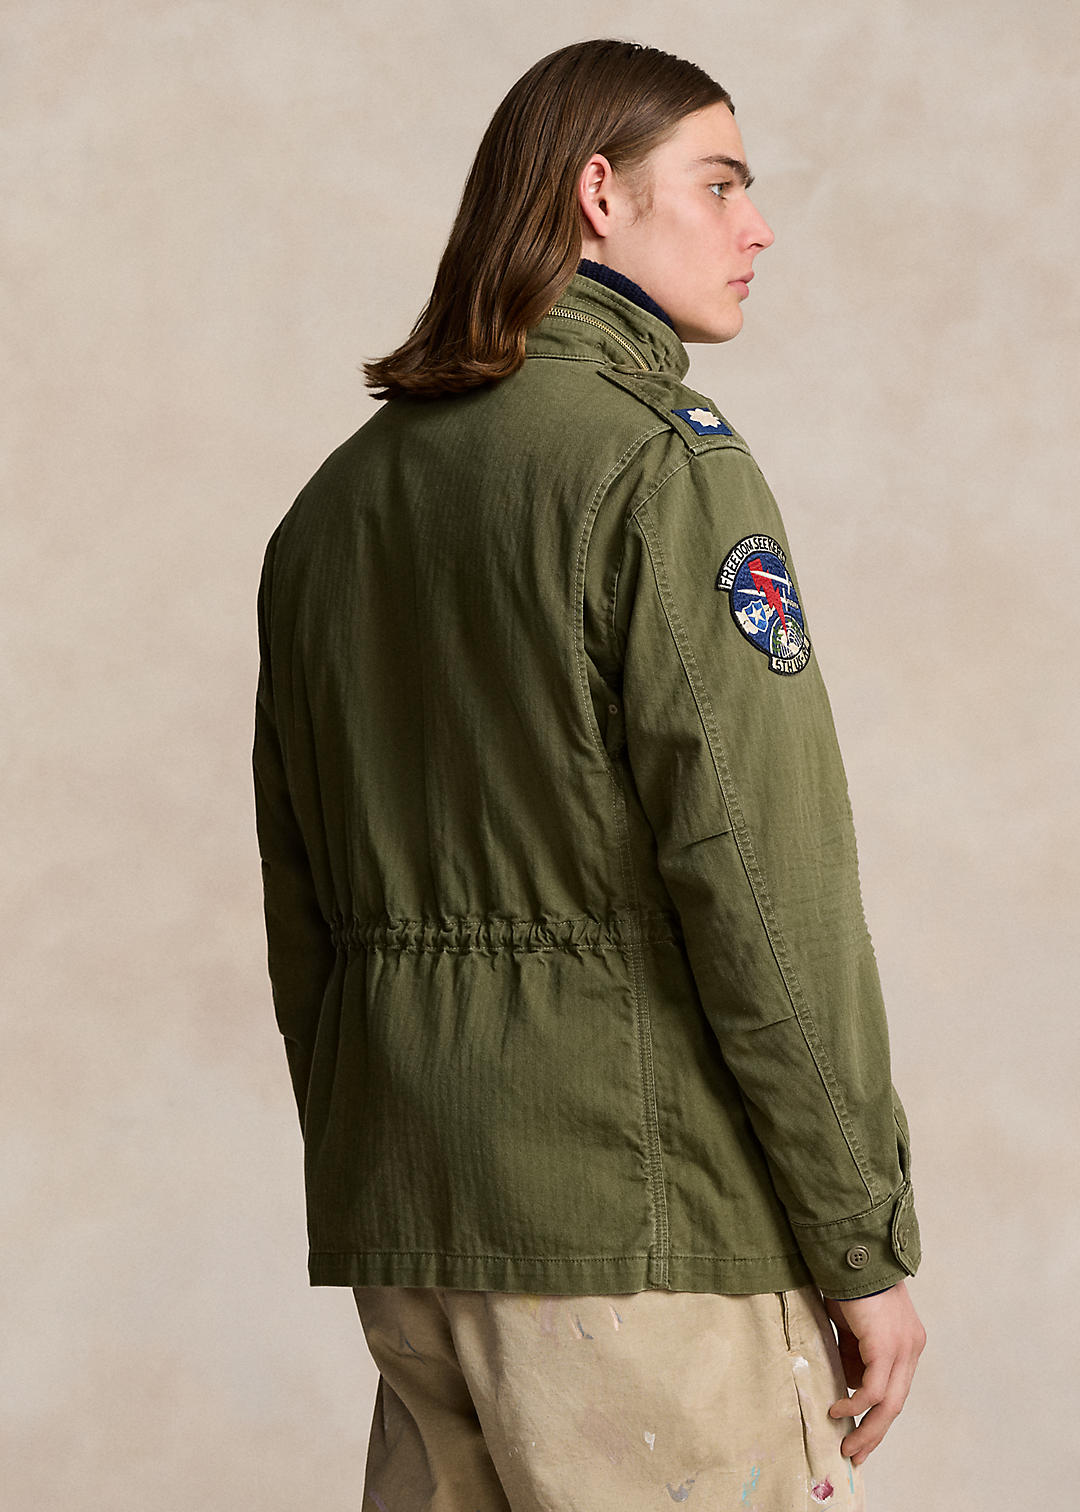 Polo Ralph Lauren The Iconic Field Jacket 4